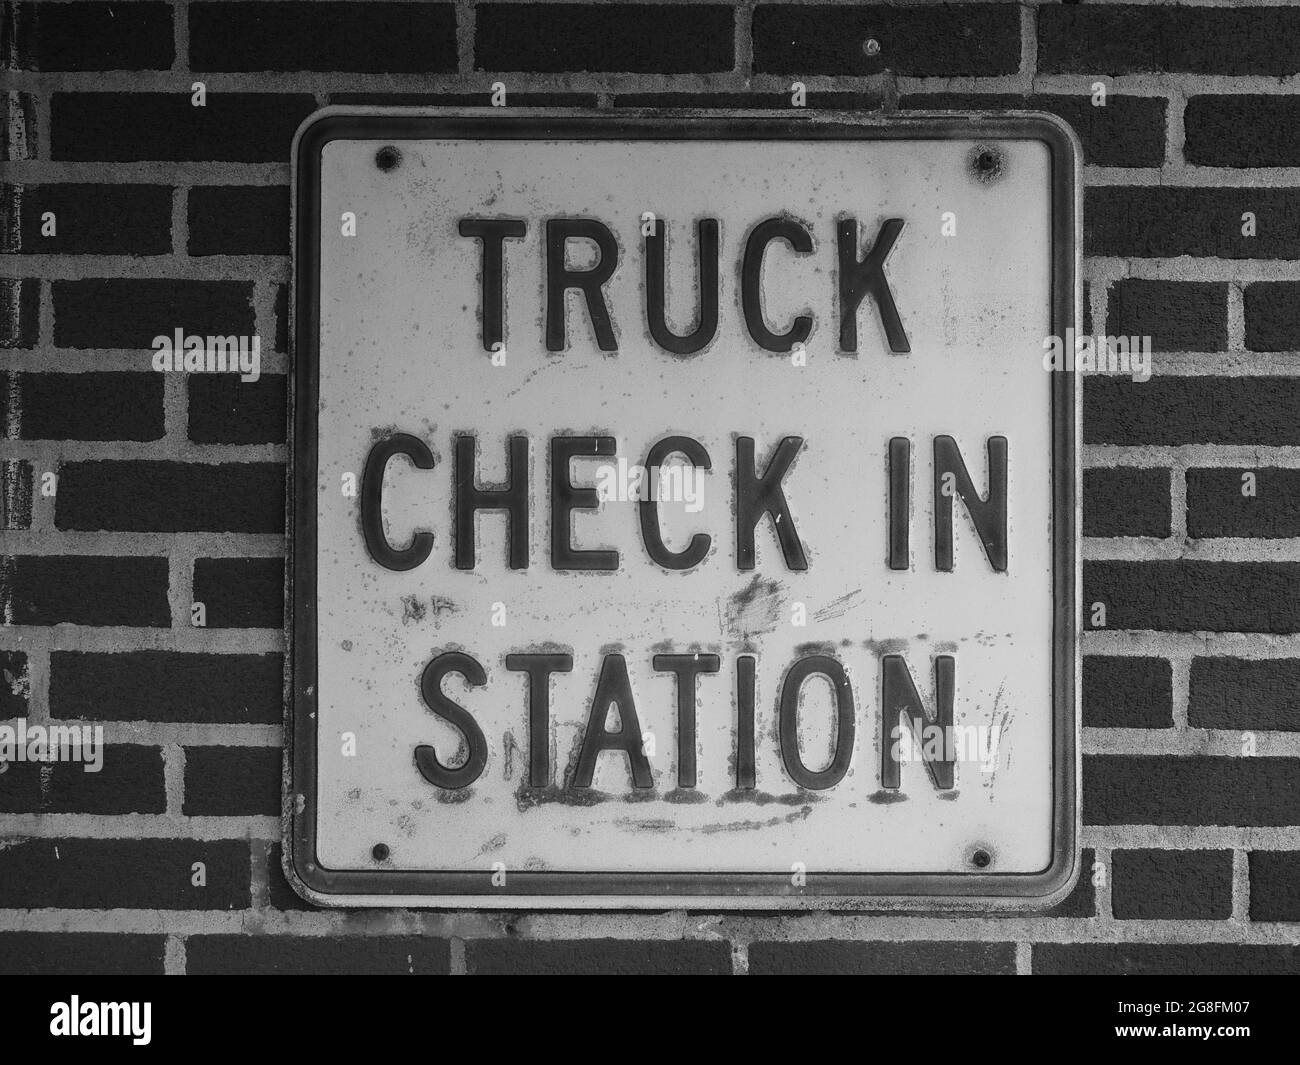 Monochromatic image of an iron plate with the text truck check in station engraved in it. Stock Photo